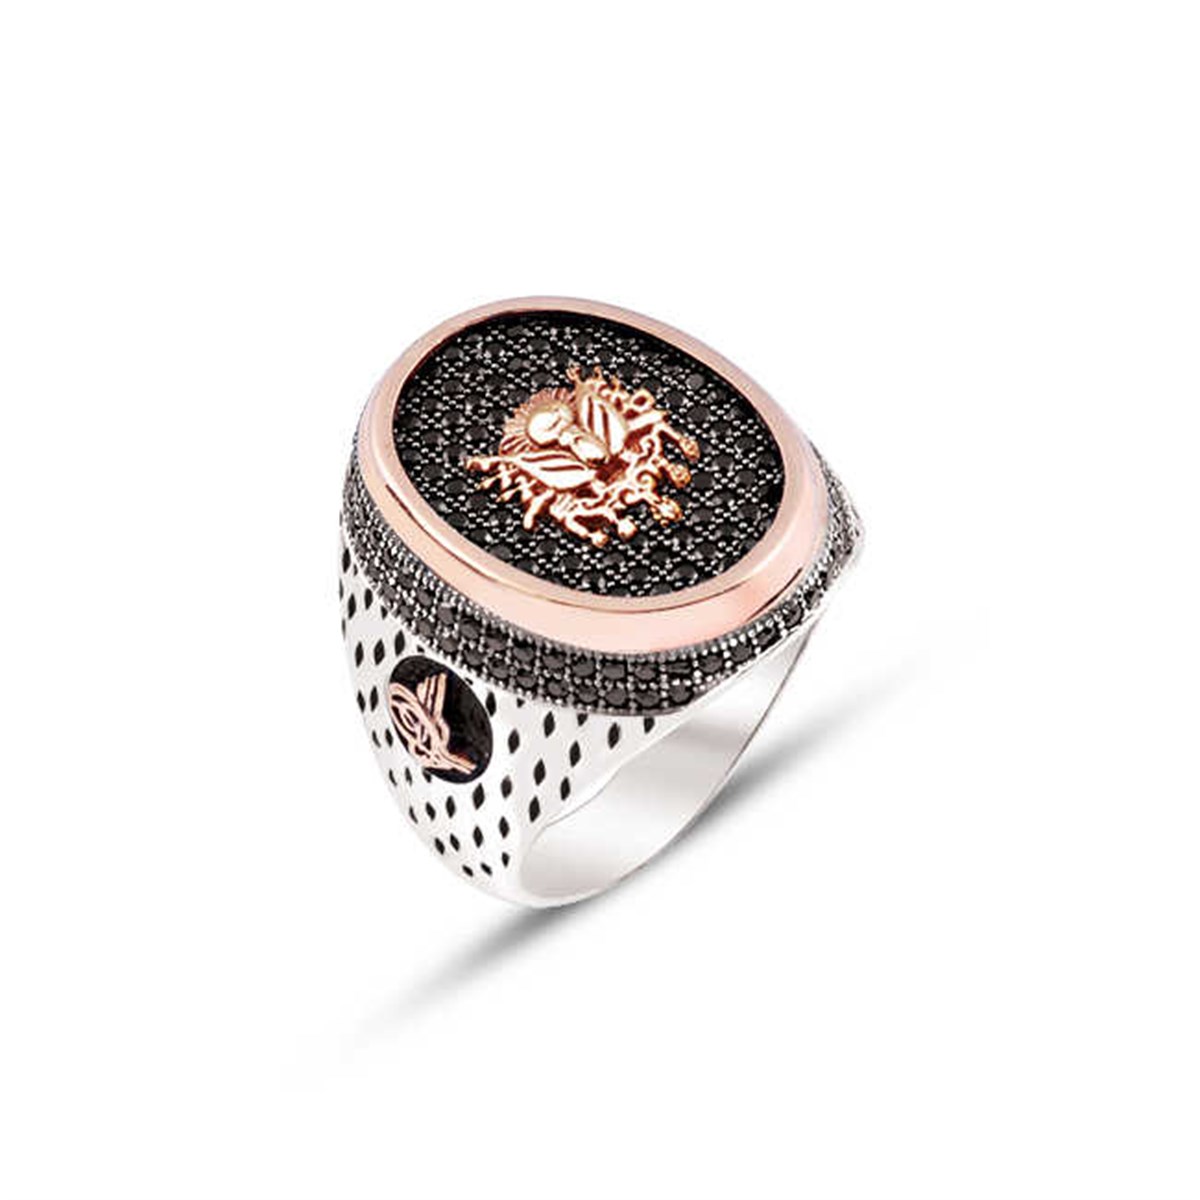 Silver Zircon Stone Embroidered Men's Ring